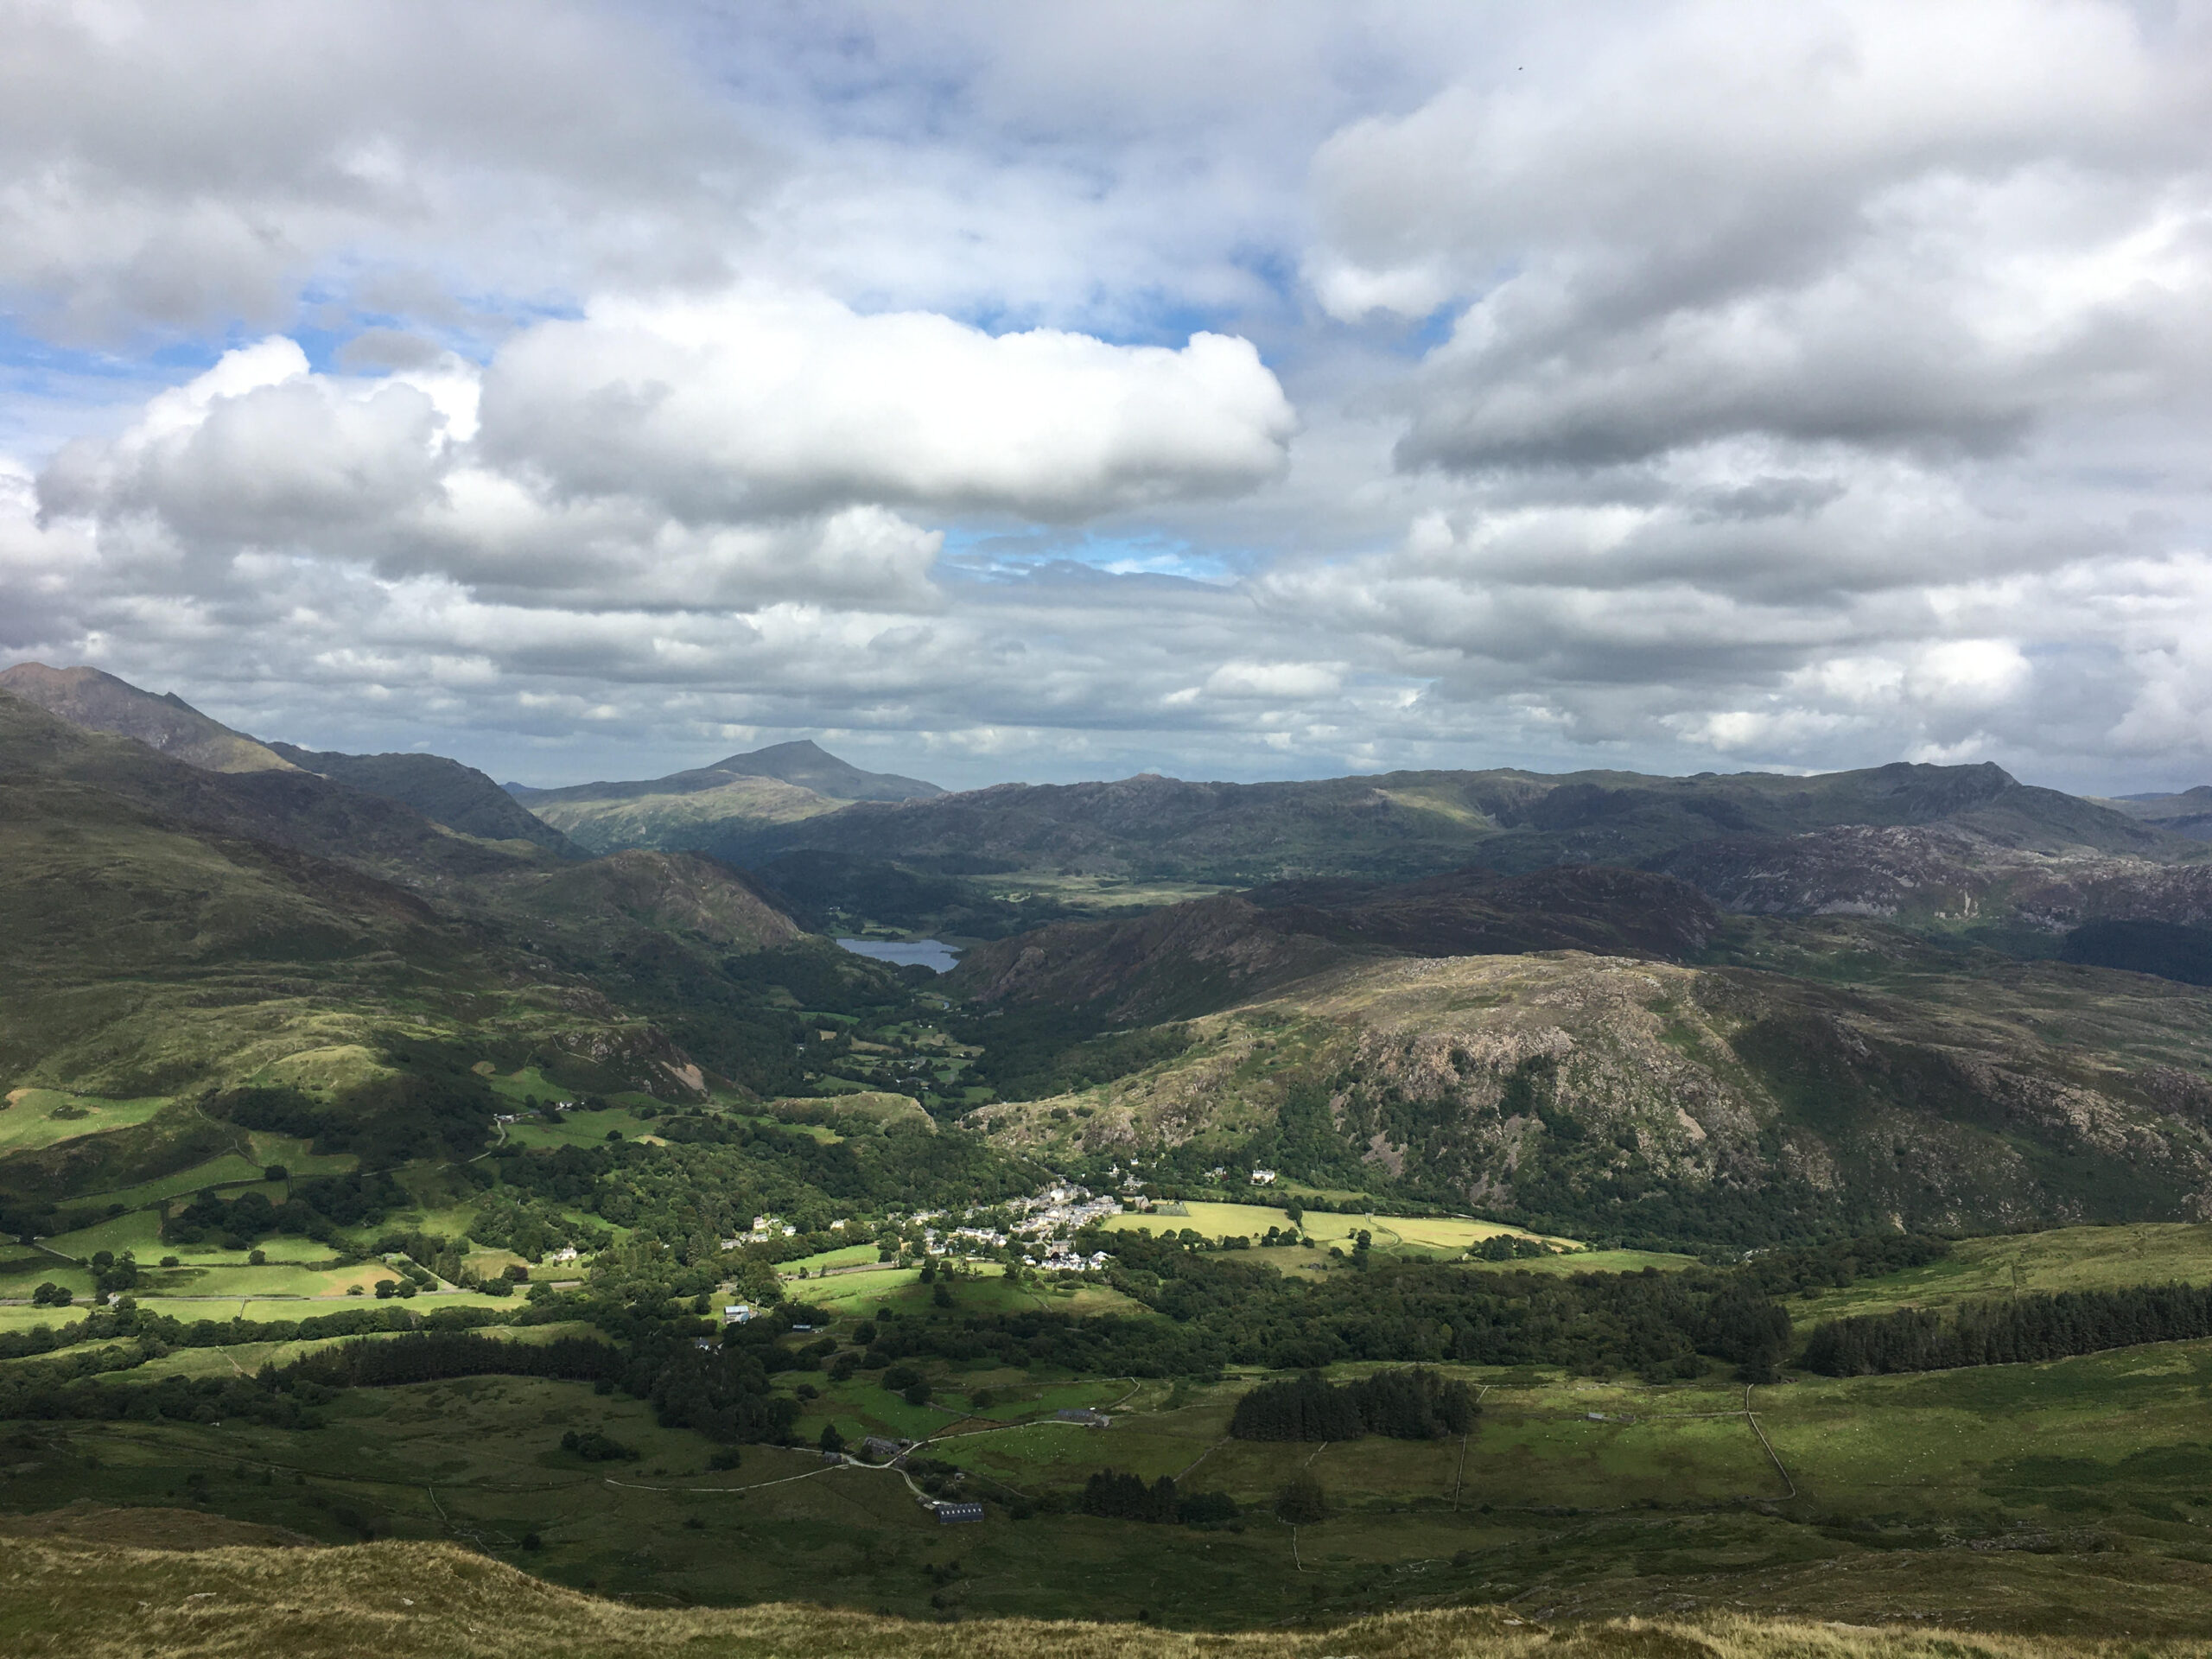 Cycling cafes and cycle rides in Snowdonia